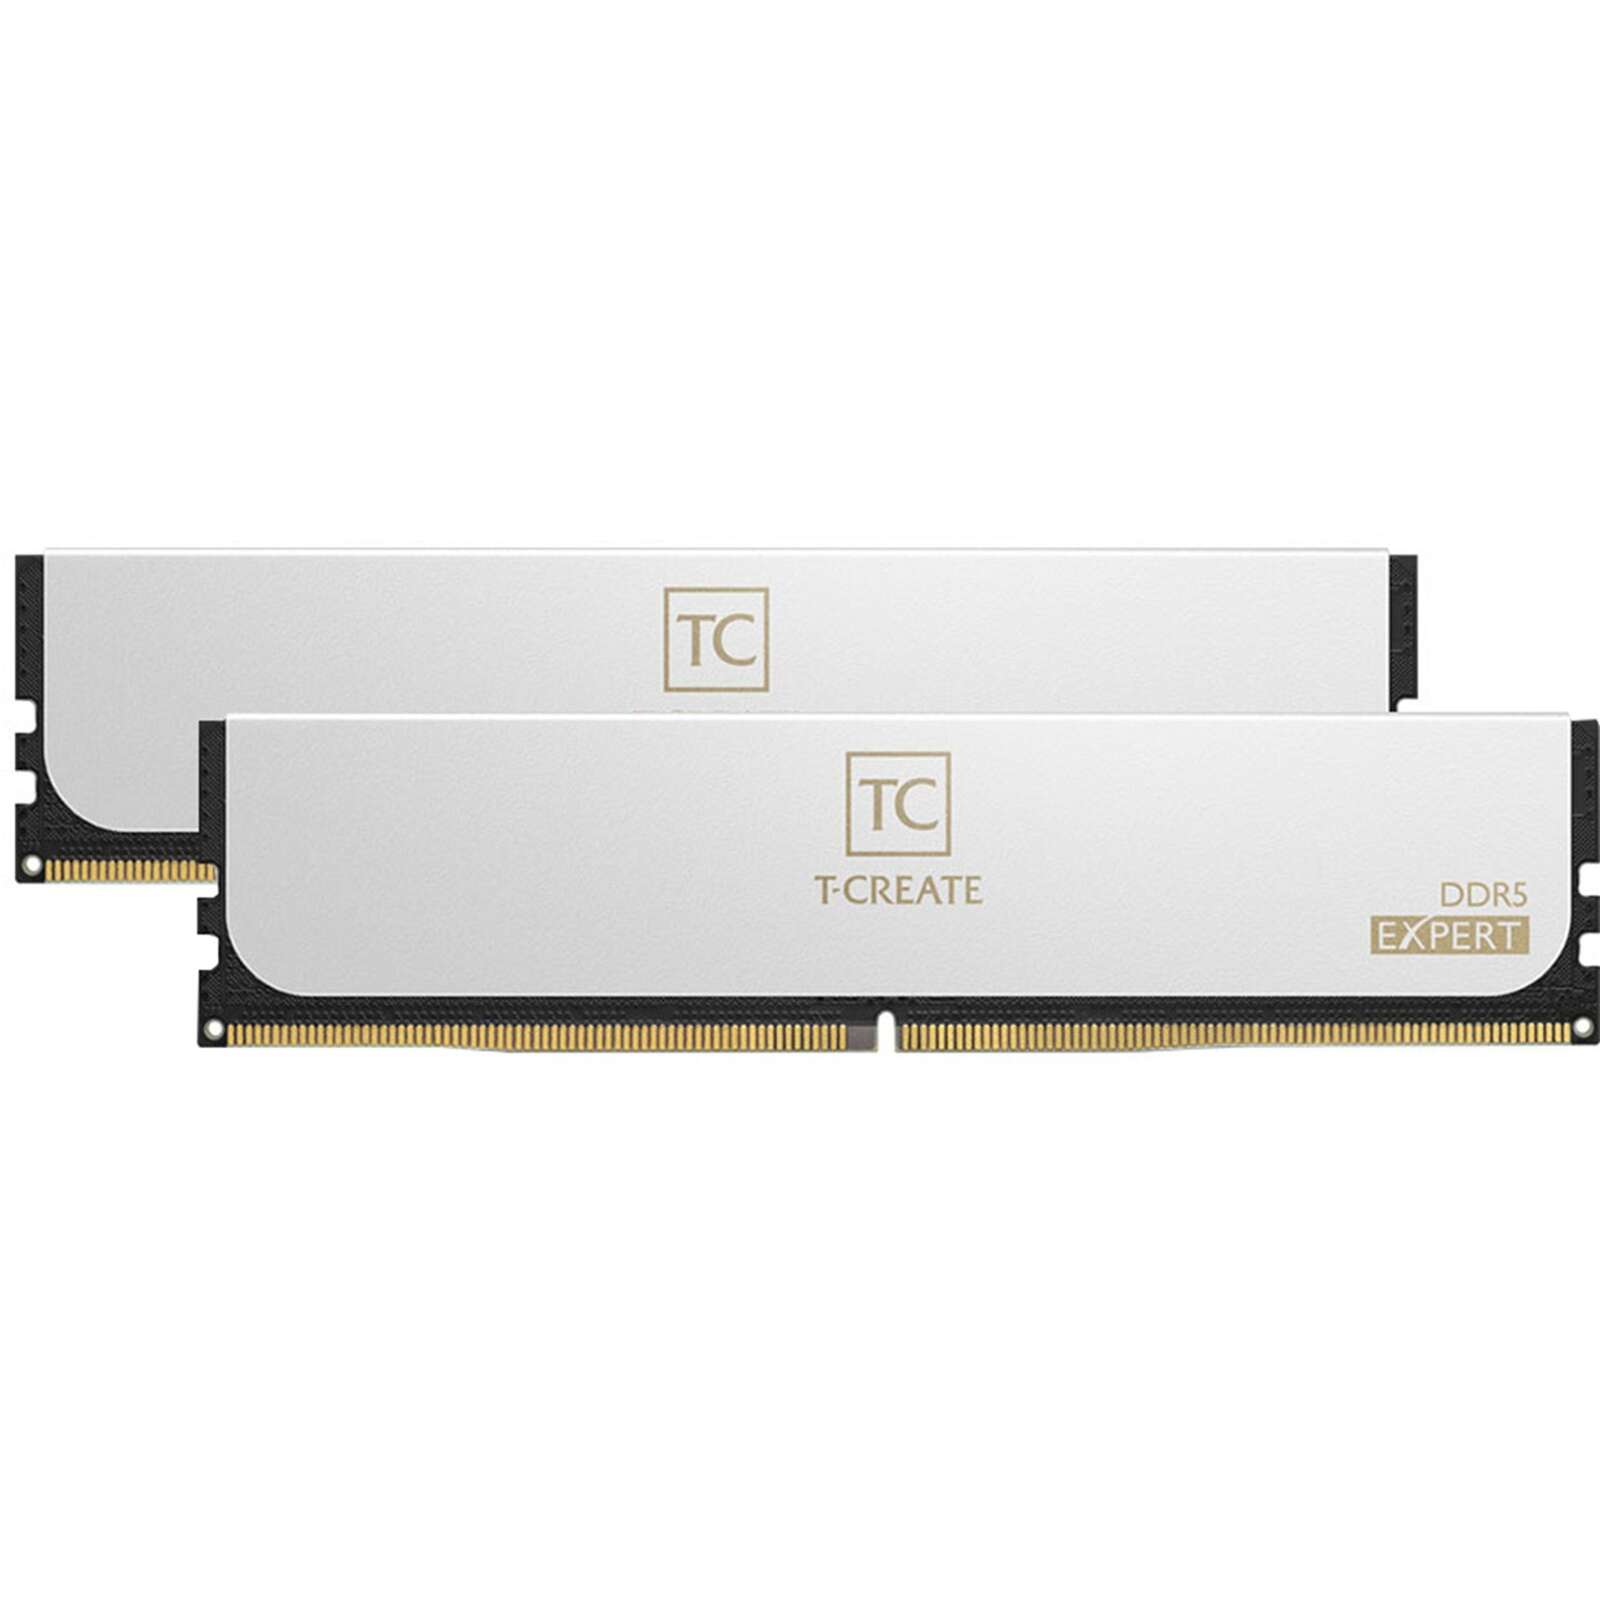 Teamgroup 64gb / 6400 t-create expert ddr5 ram kit (2x32gb) - feh...